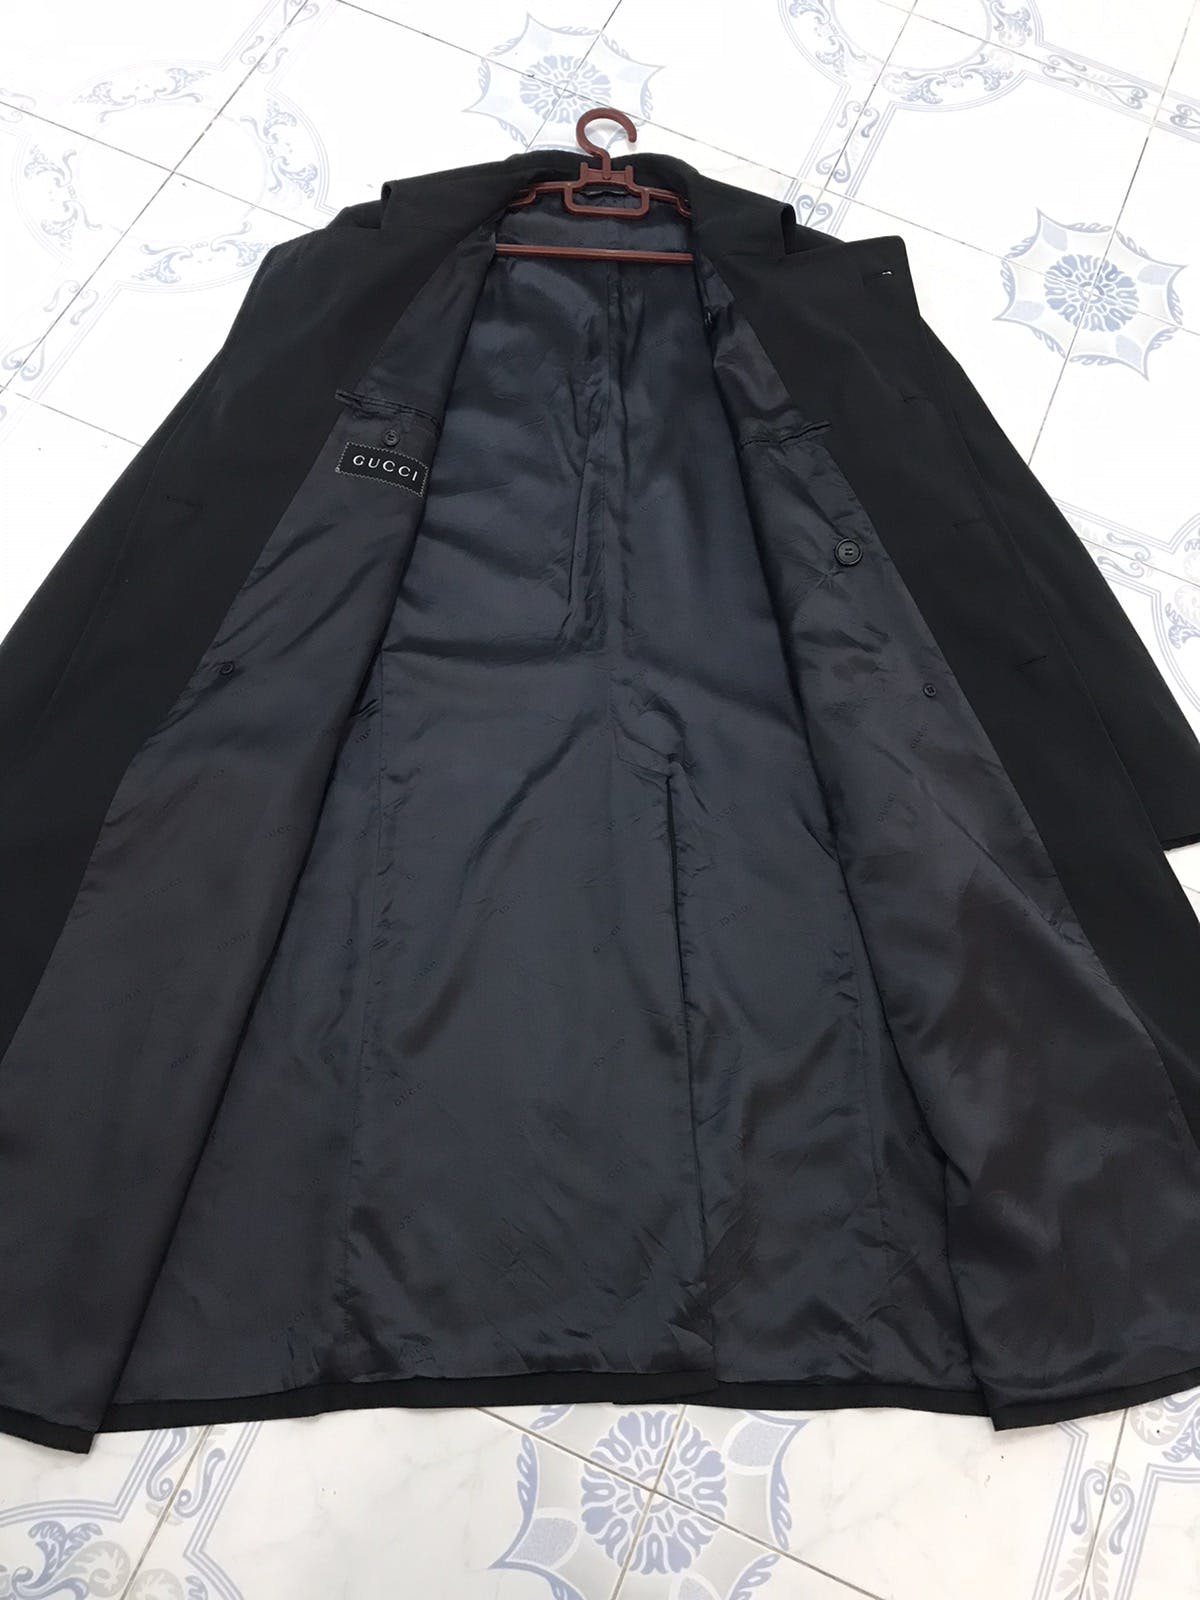 Gucci Long Coat/Jacket Made in Italy - 16